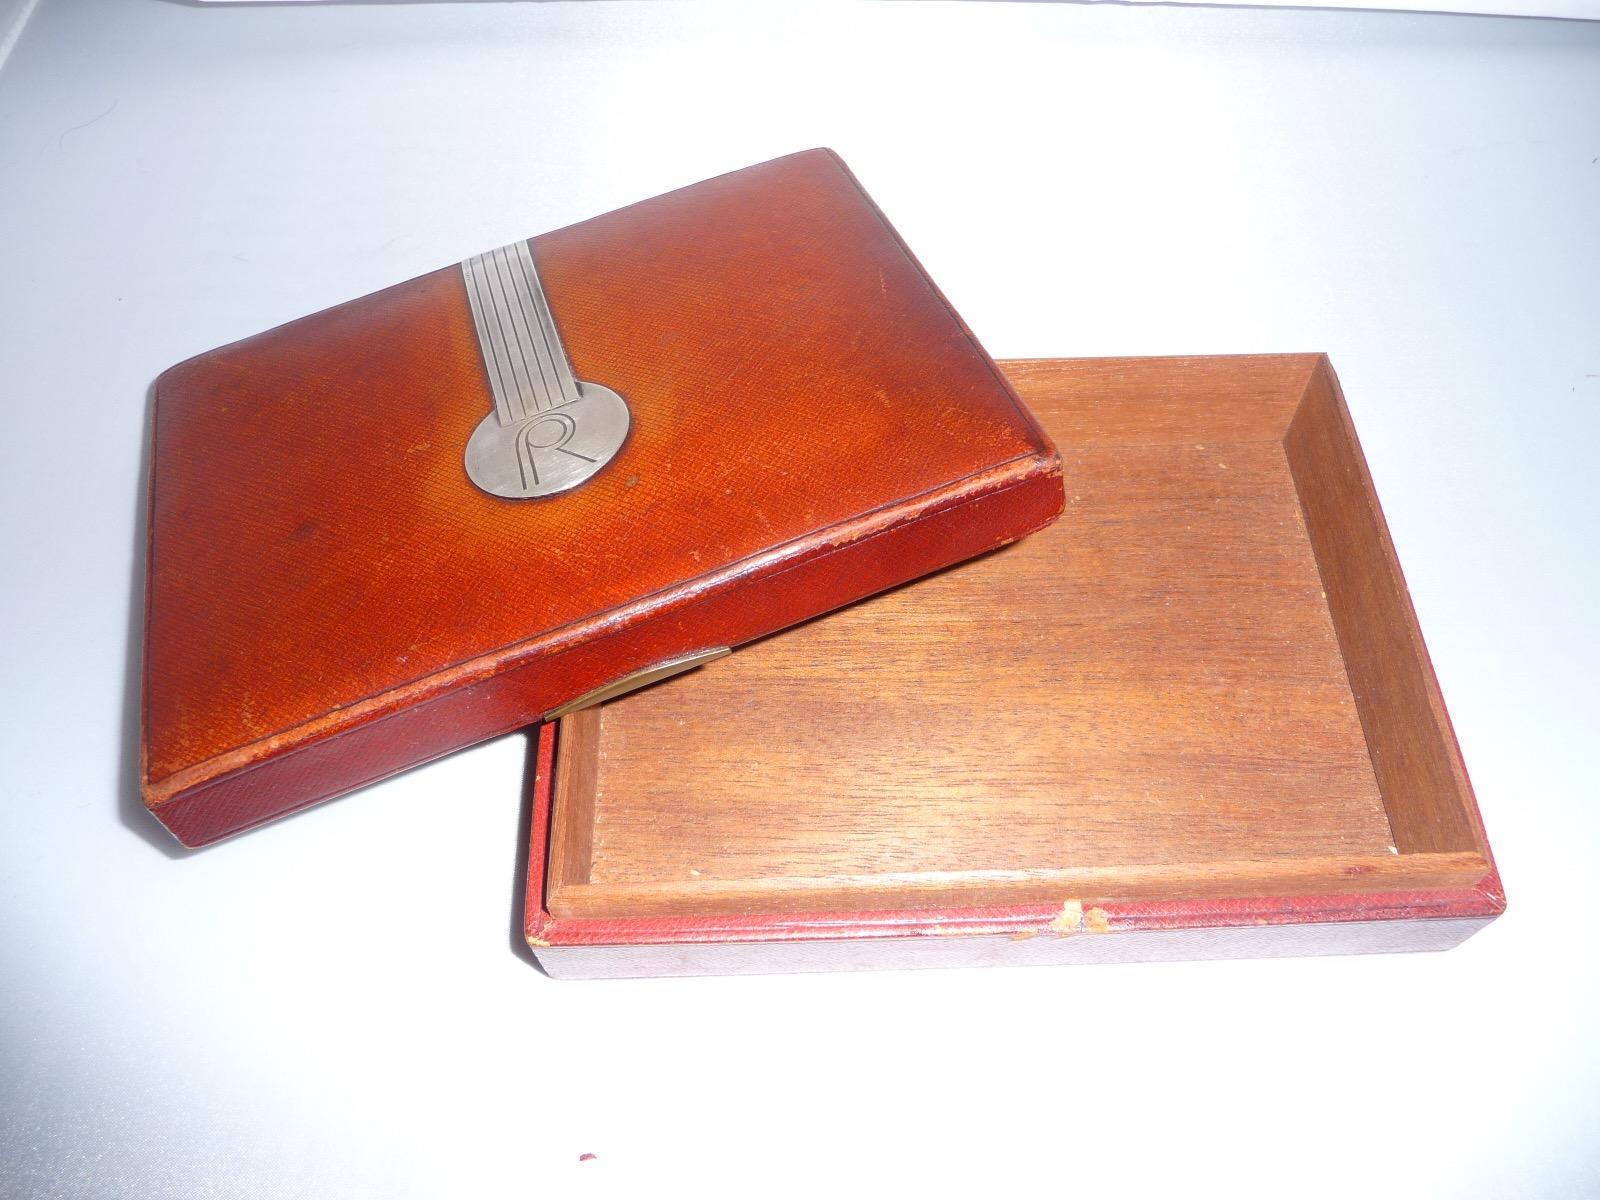 Woodwork French Art Deco box by Jean E.Puiforcat. Signed and stamped. 